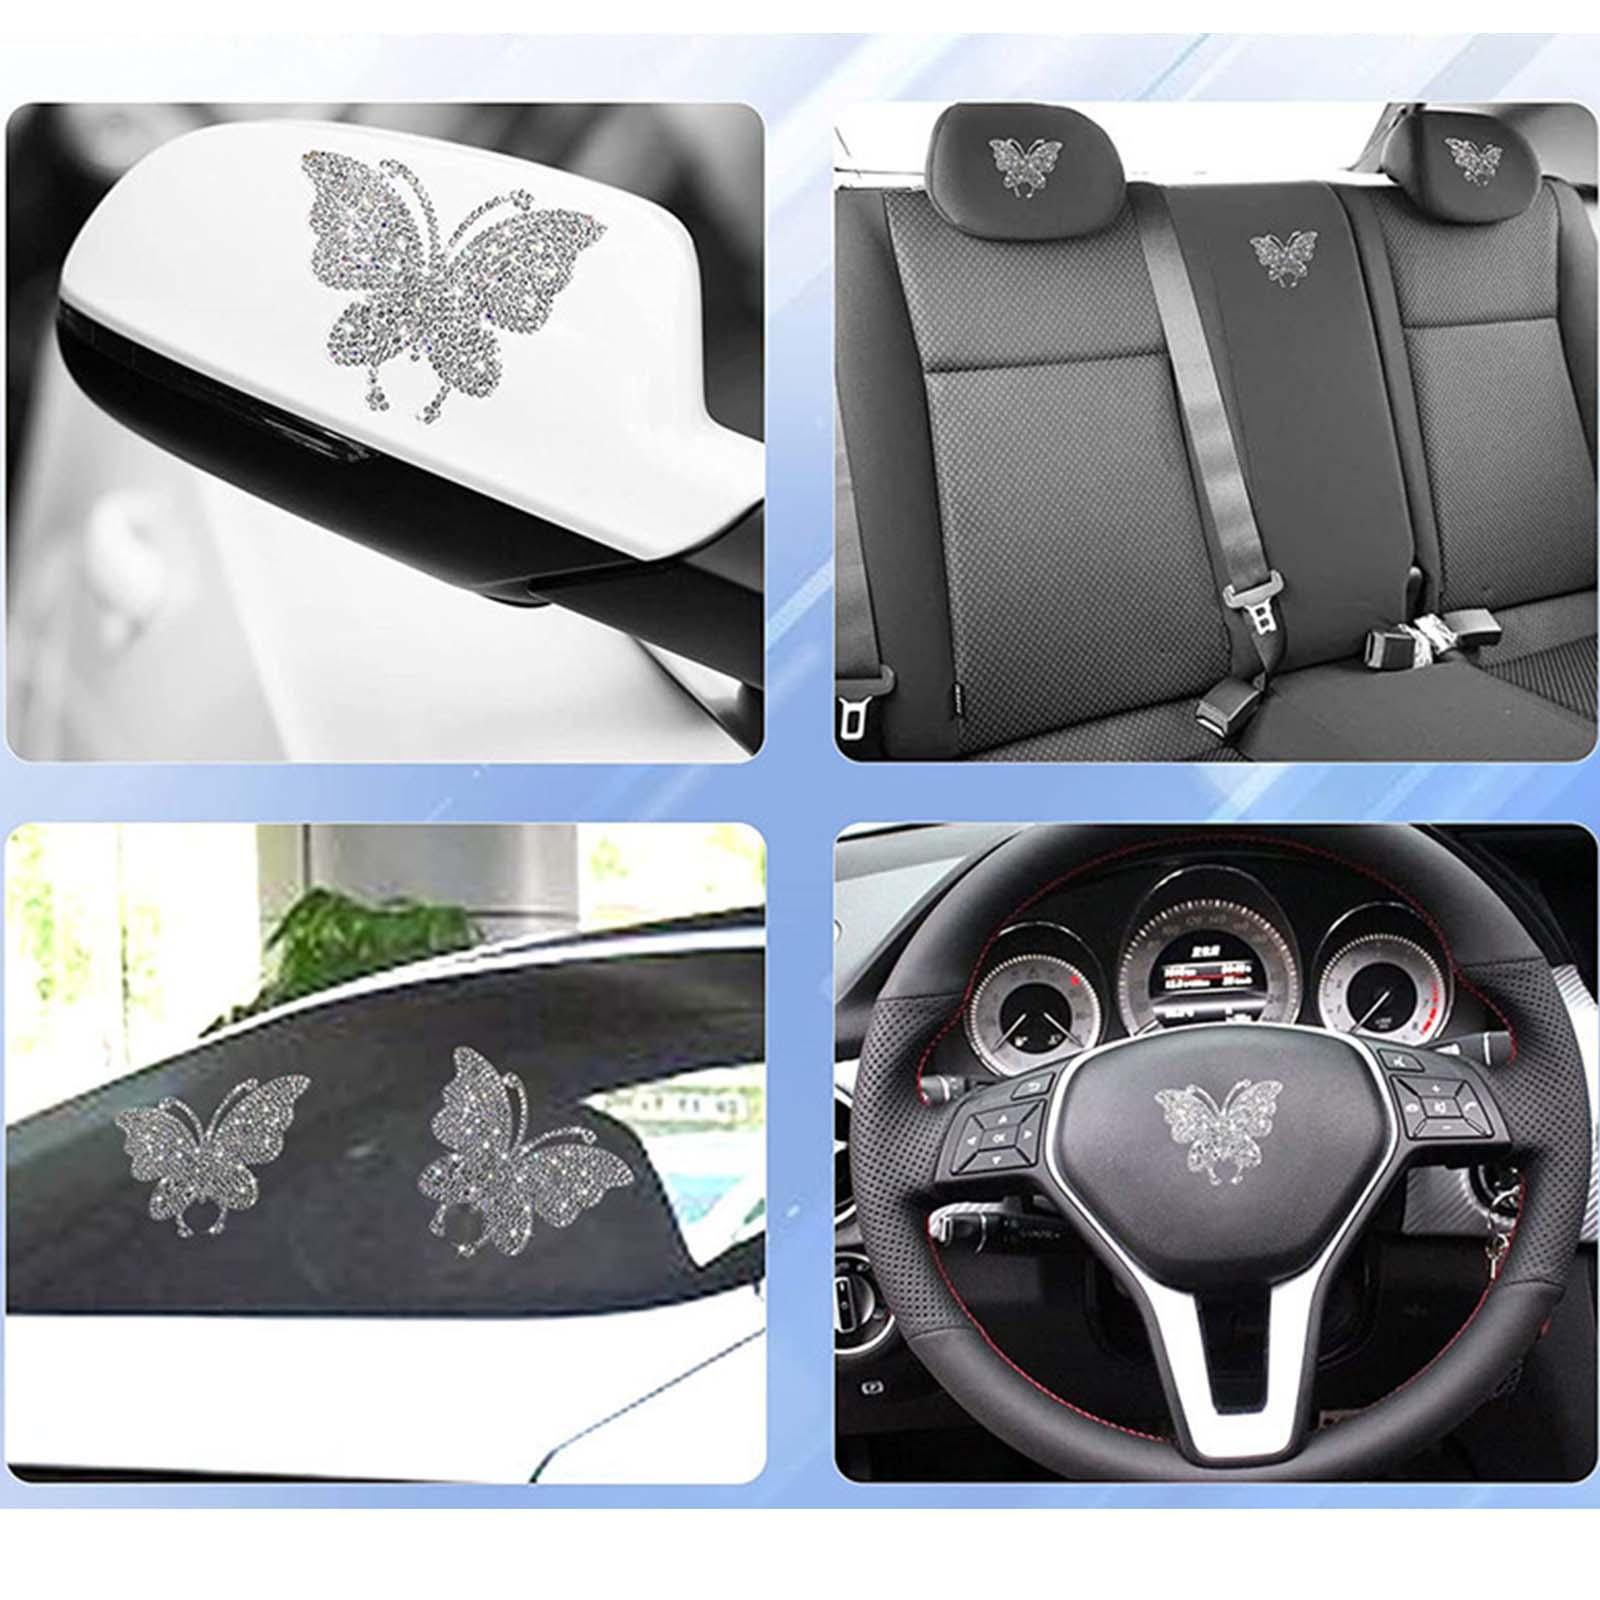 Bling Car Stickers Decals Car Interior Sticker for Cars window Butterfly